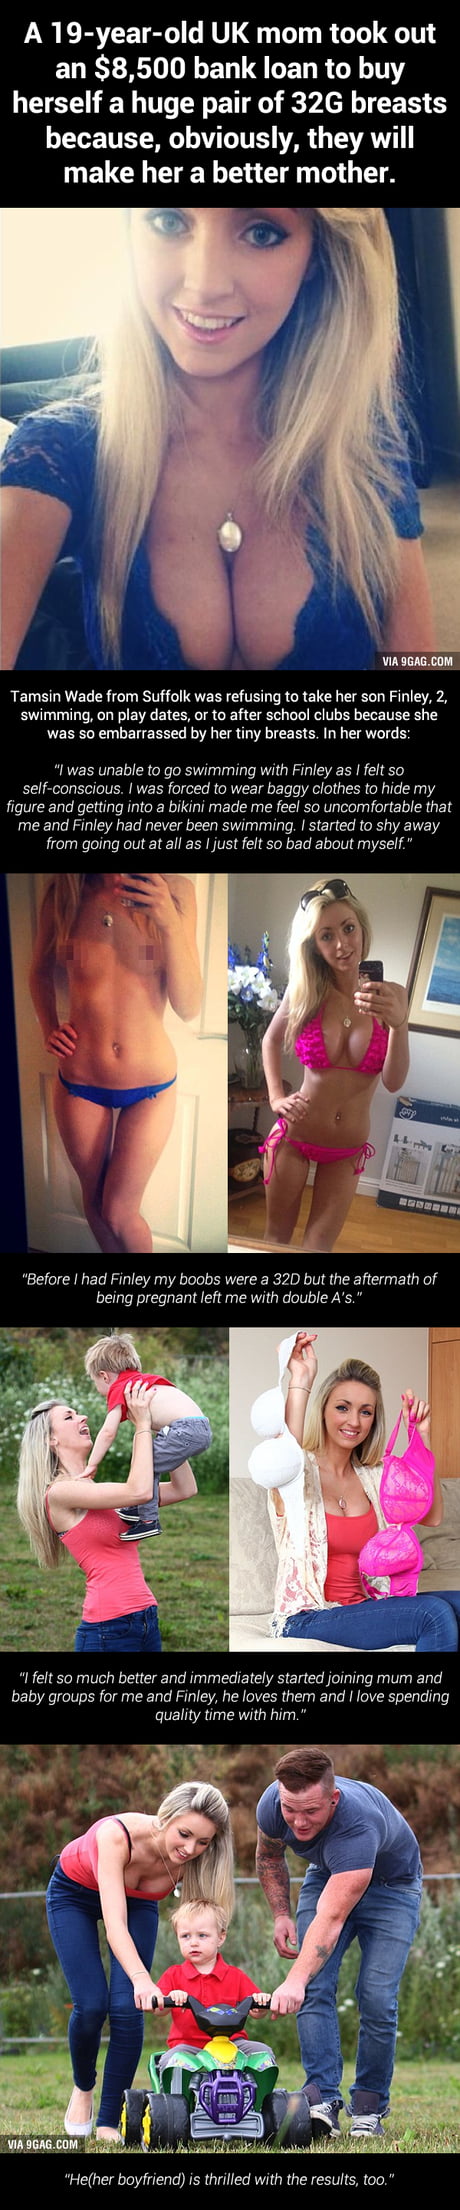 A 19-Year-Old Woman Spends $8,500 On Big Fake Tits To Become A Better Mom.  - 9GAG